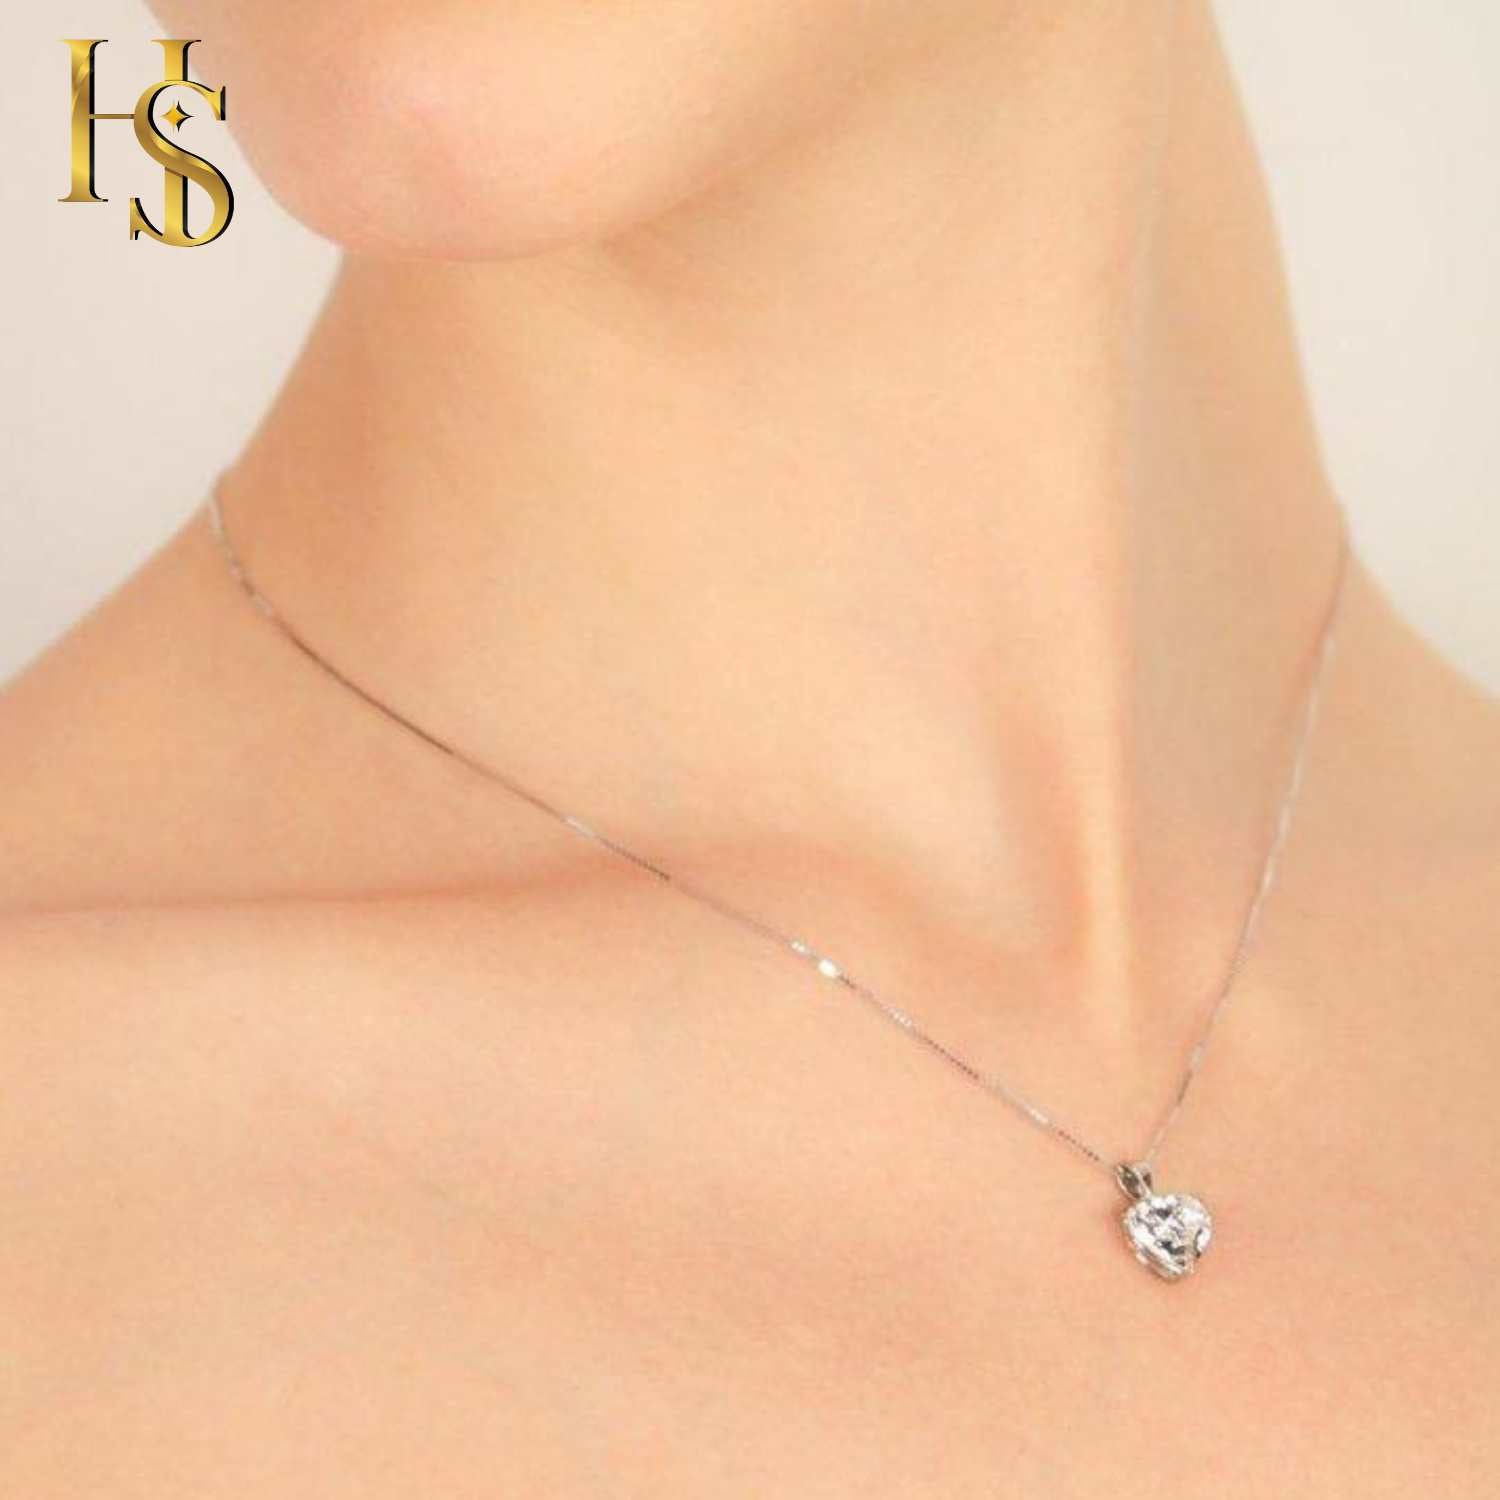 110 Ct. Diamond Necklace - Auction Daily